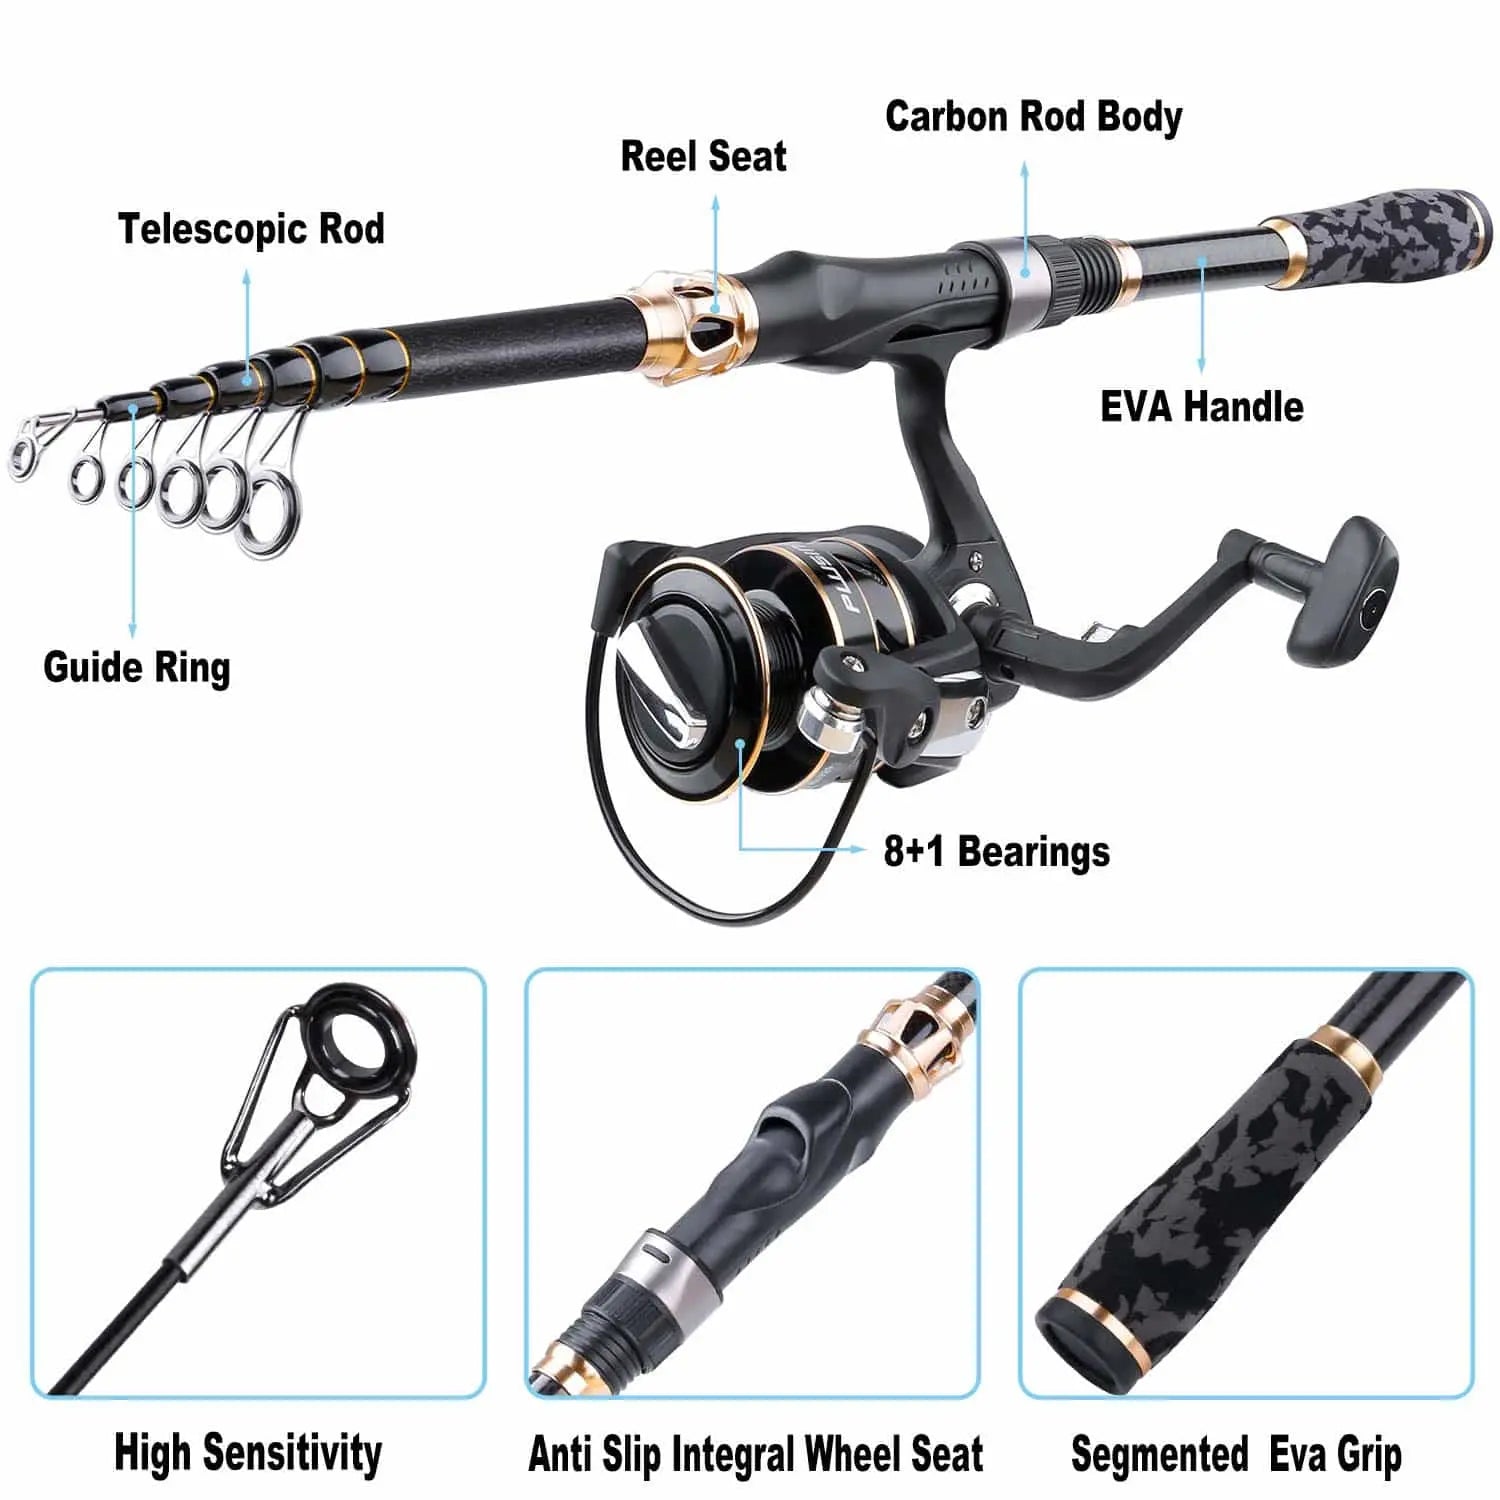 PLUSINNO Eagle Hunting VI Telescopic Fishing Rods and Reel Combos